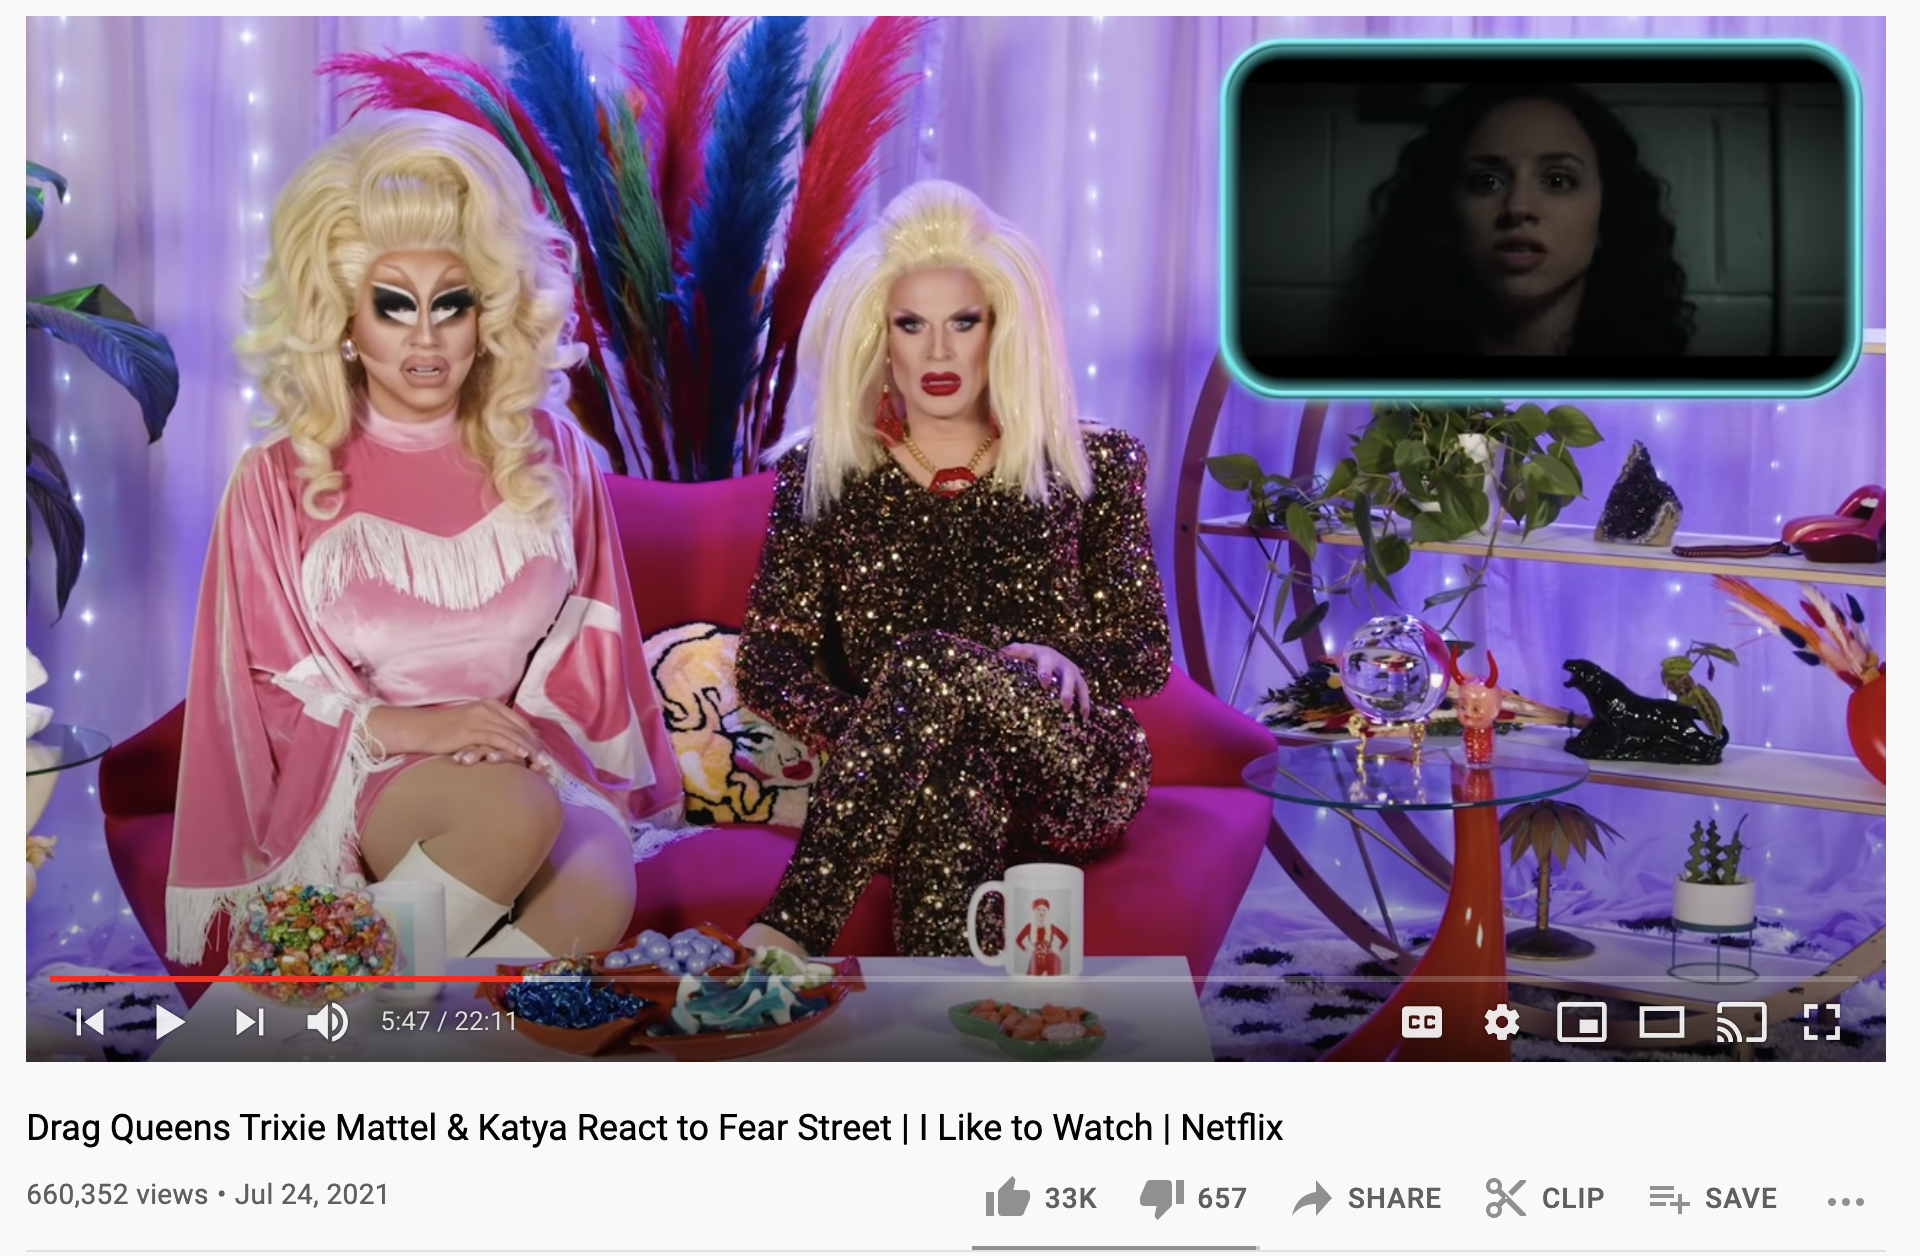 screenshot of trixie and katya react to fear street video on youtube